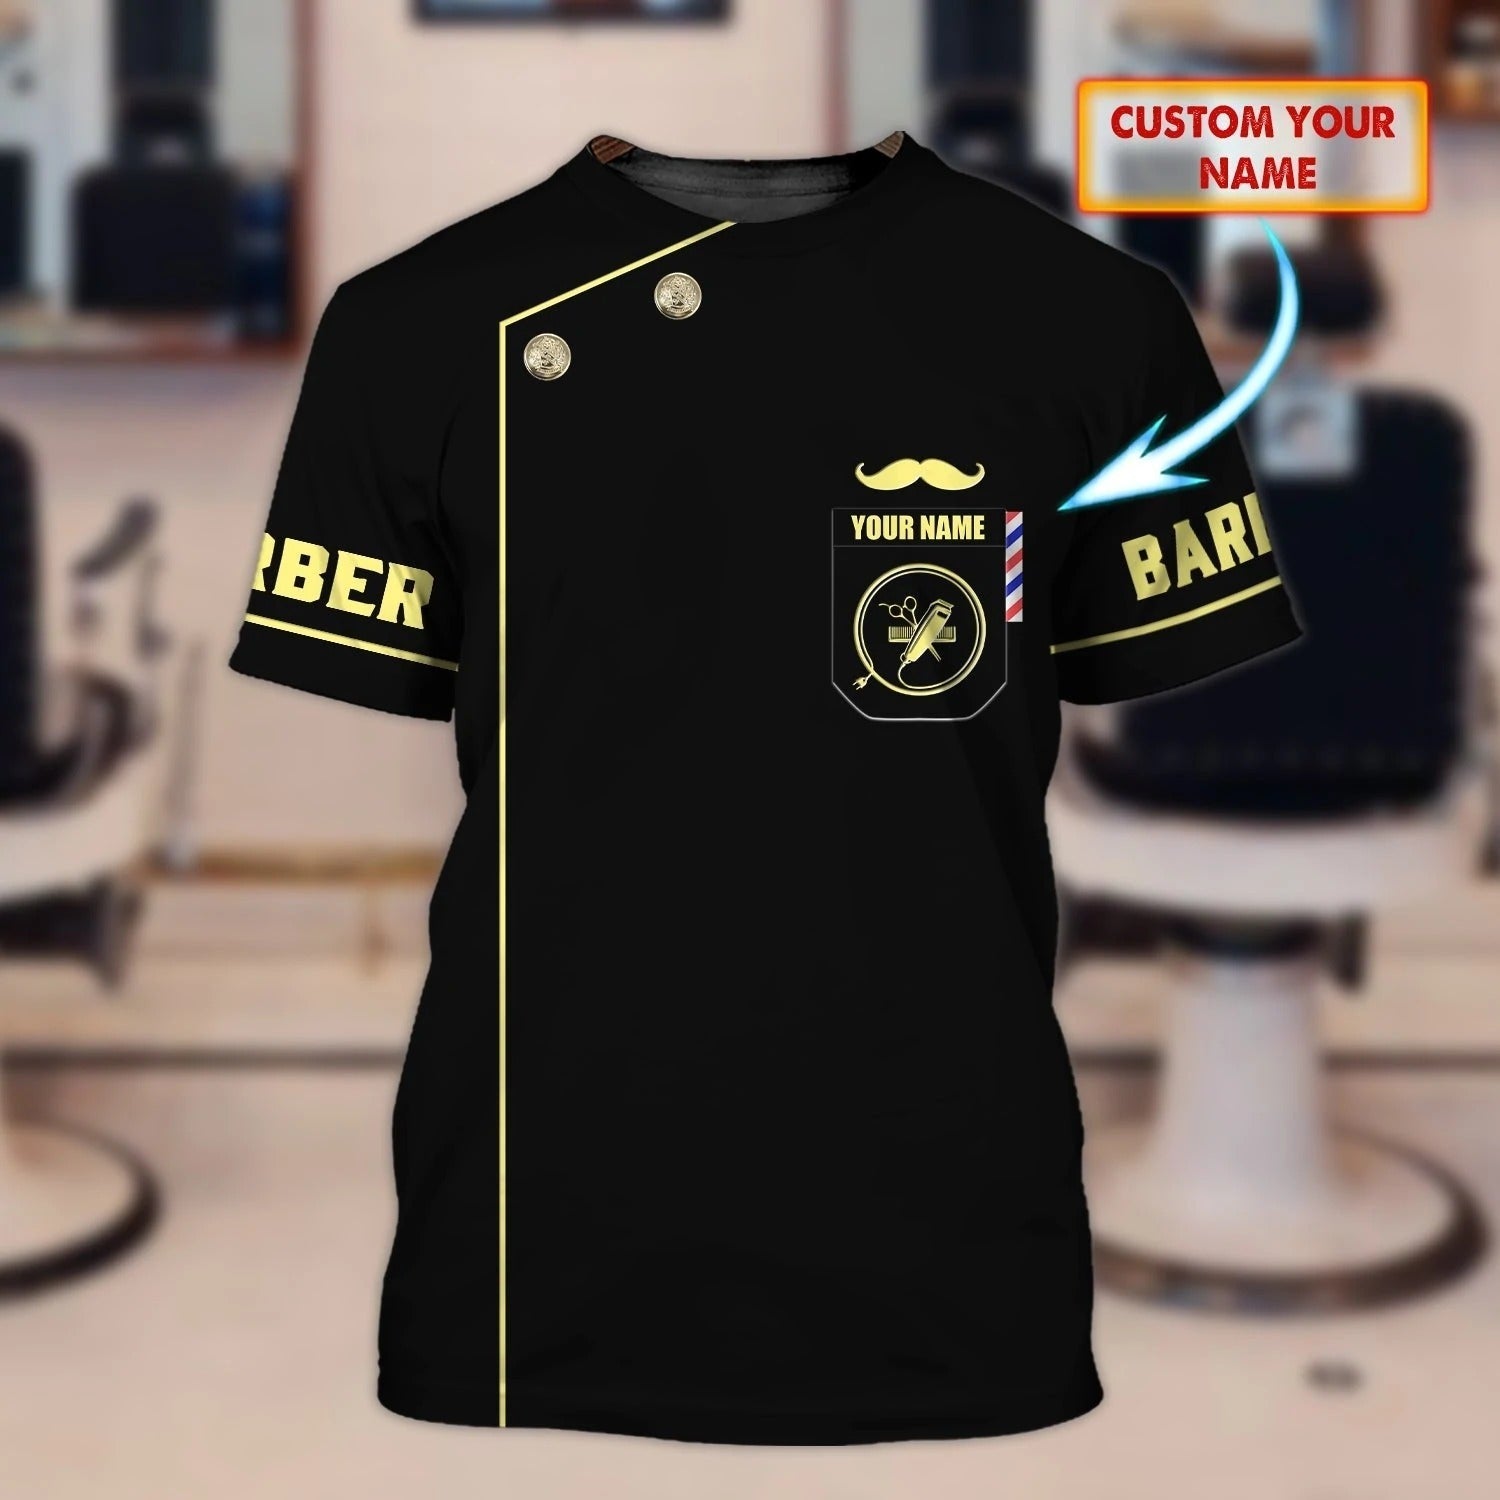 Custom With Name 3D T Shirt For A Barber/ Barber Men Shirts/ Barber 3D Tee Shirt For Him/ Gift For Barber Friend